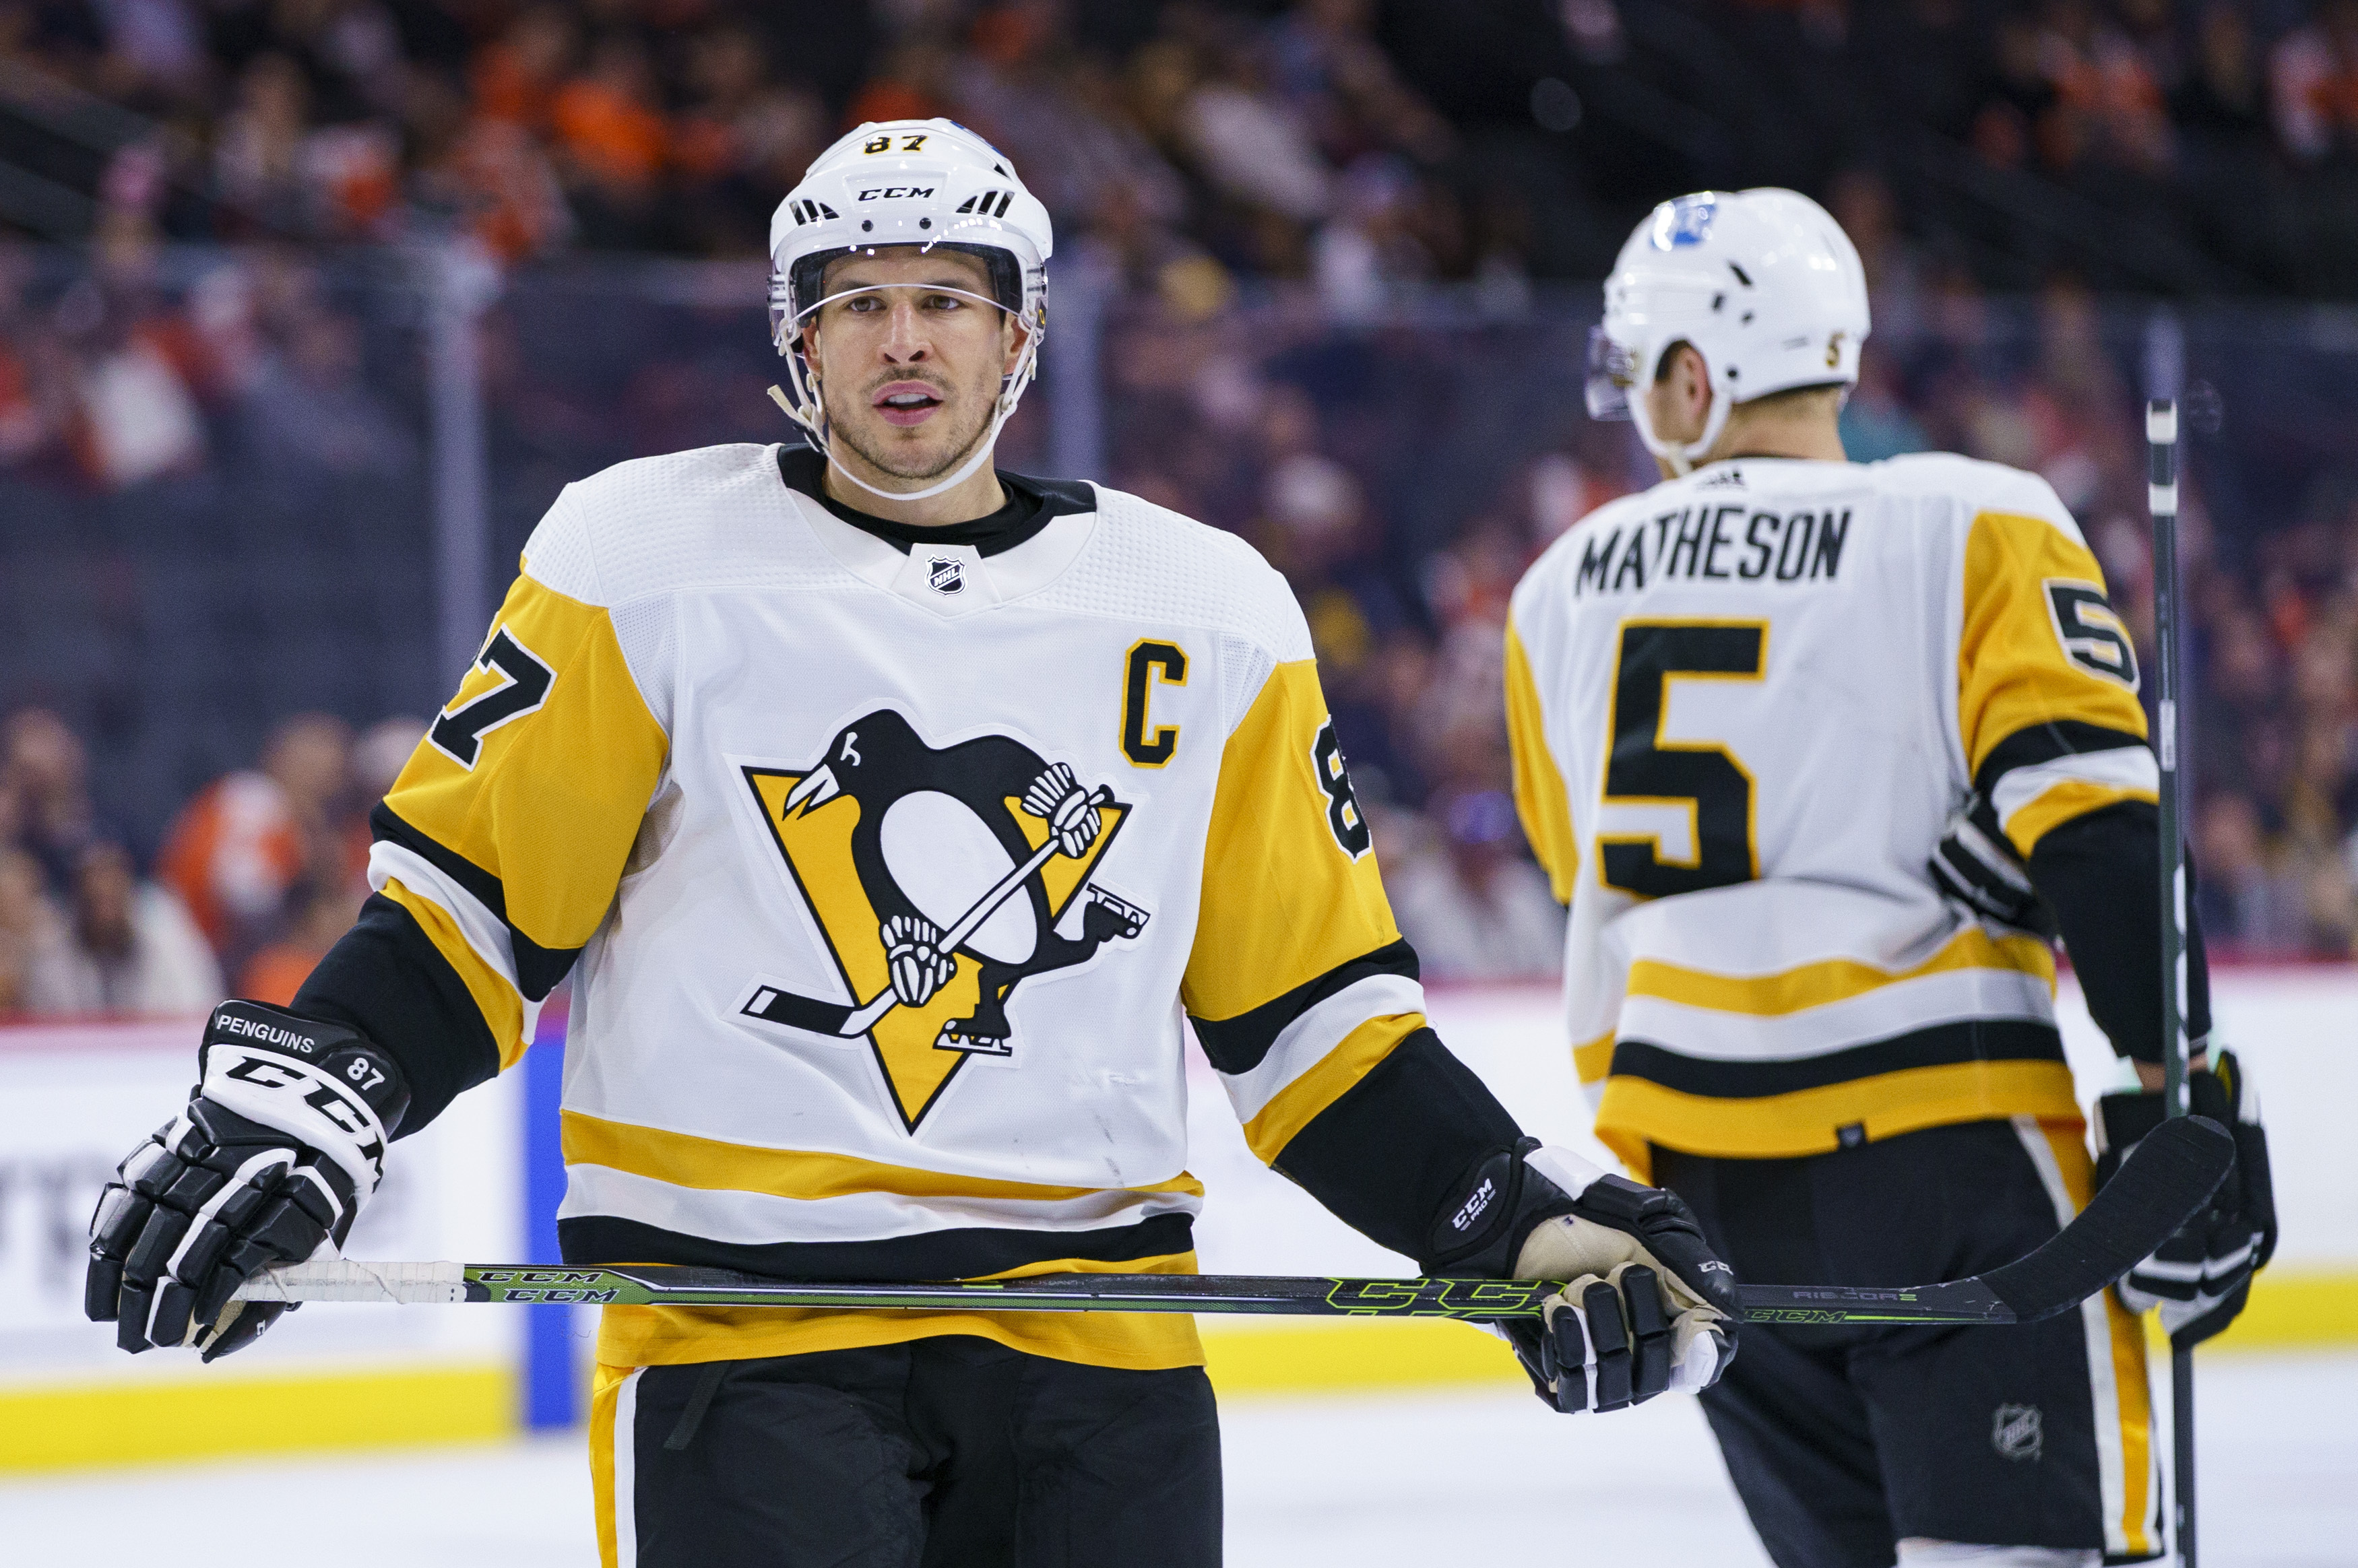 watch penguins game live for free